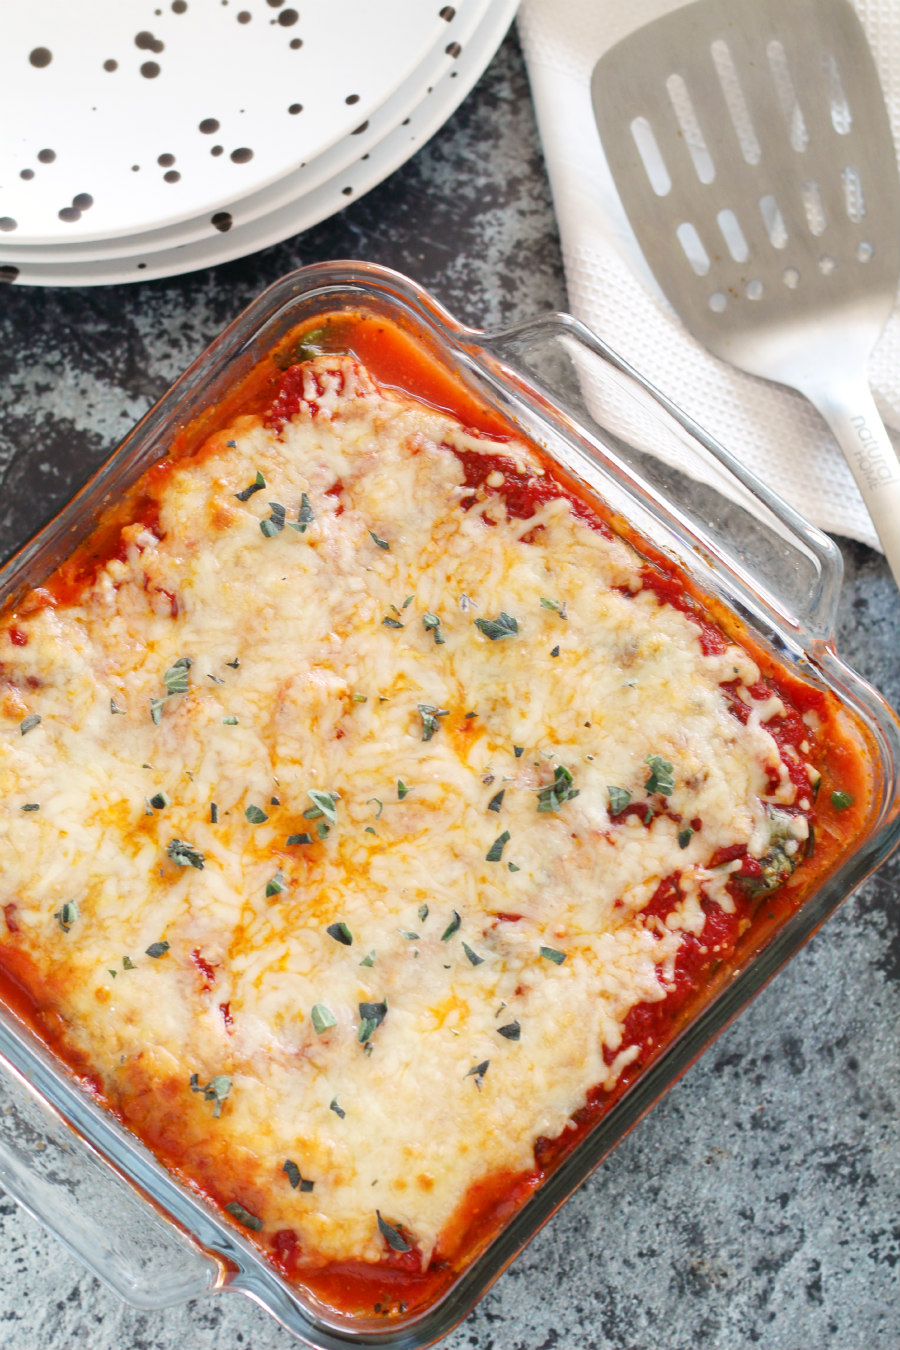 This Low-Carb Zucchini Lasagna is healthy comfort food at its finest. This Keto Diet approved dish uses zoodles to create a vegetarian lasagna that's a healthier classic to a high-carb pasta favorite.